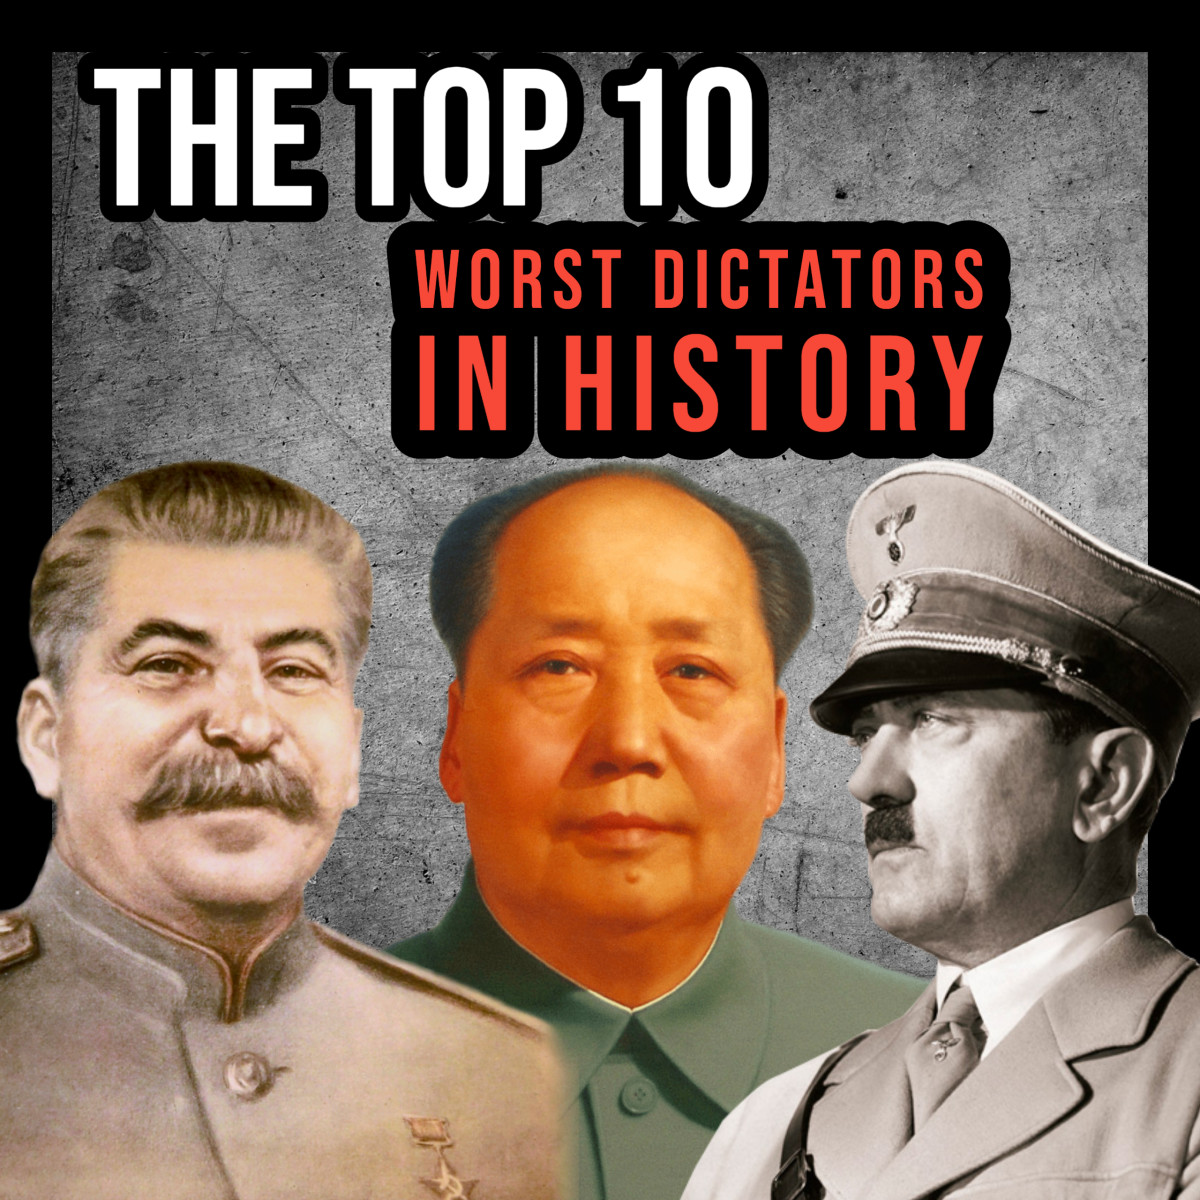 From Ivan the Terrible to Mao Zedong, this article ranks the 10 worst (and most brutal) dictators in human history!